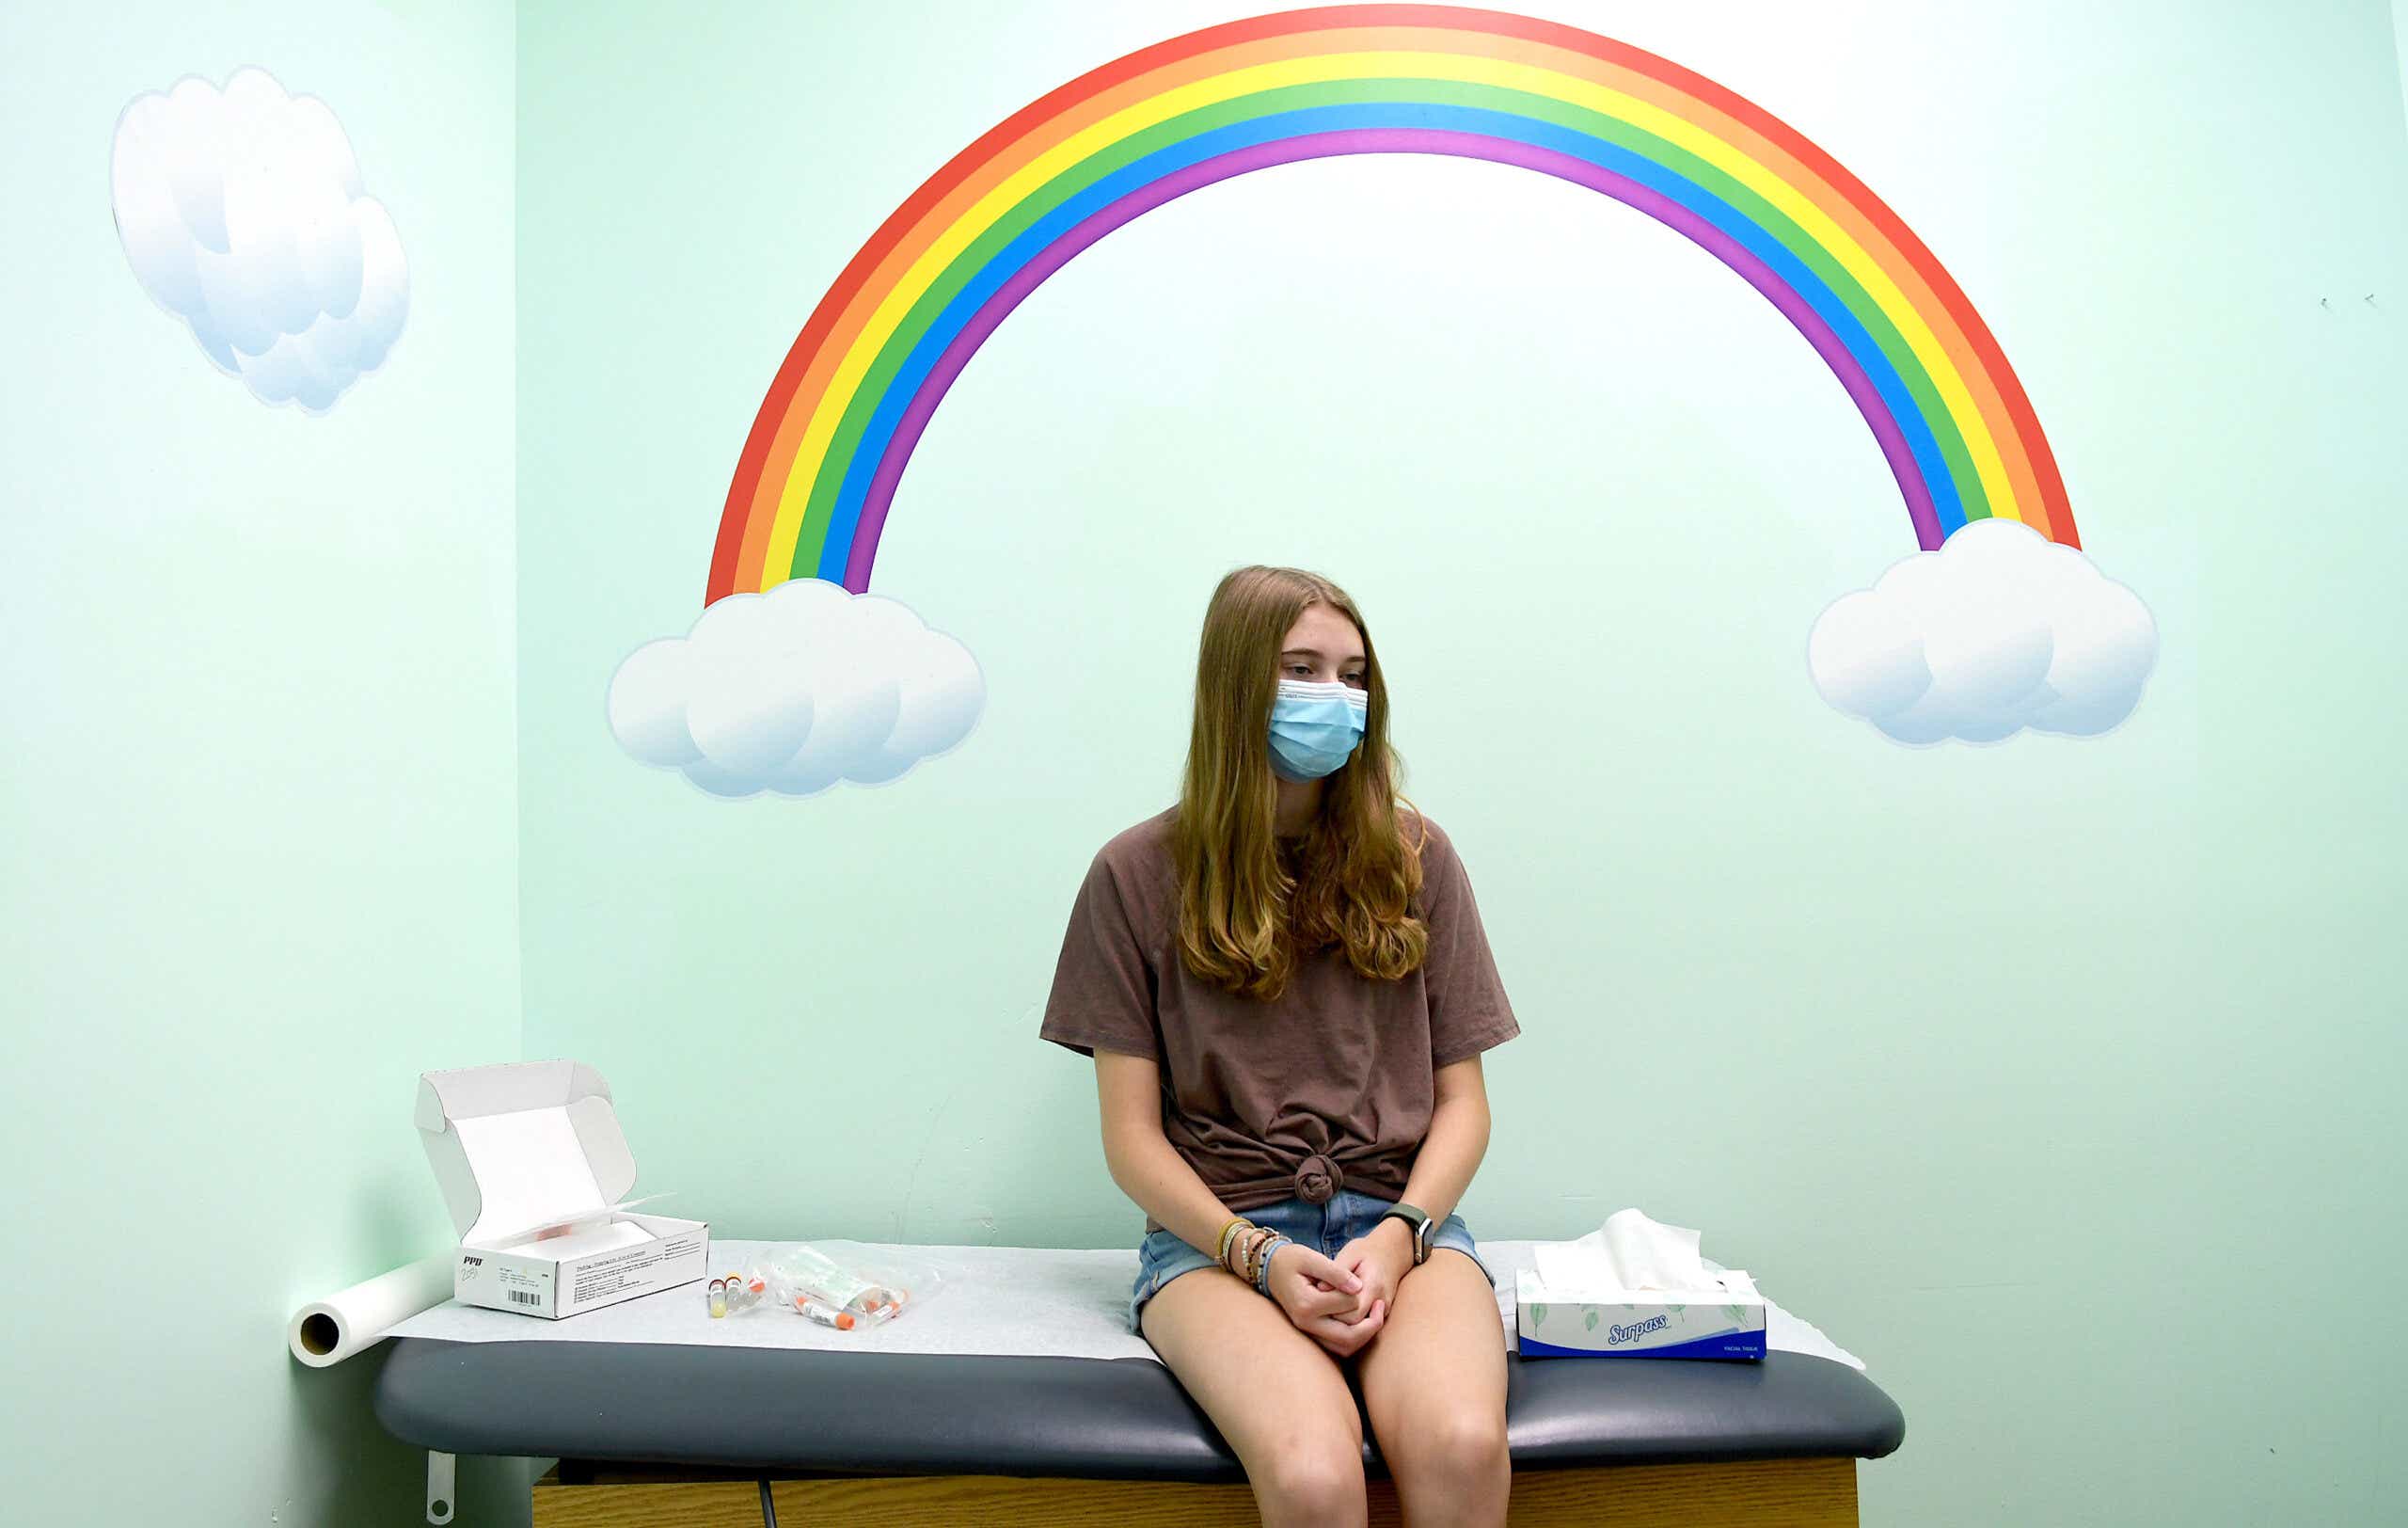 Brooke Stroud, a 16-year-old patient, awaits blood testing